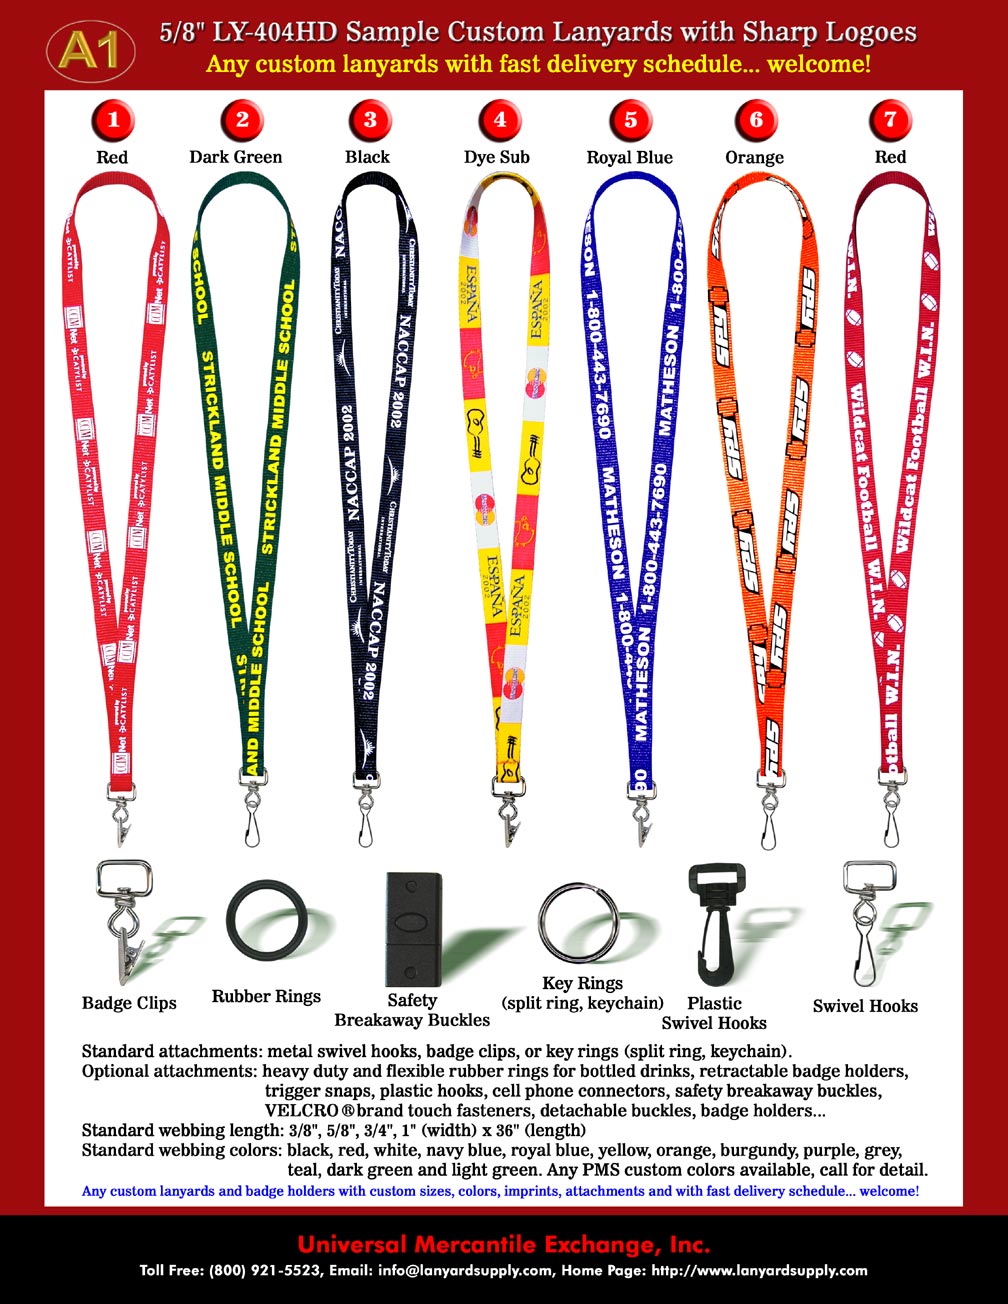 Lanyard: High-Quality and Heavy-Duty Lanyards with option of Safety Breakaway